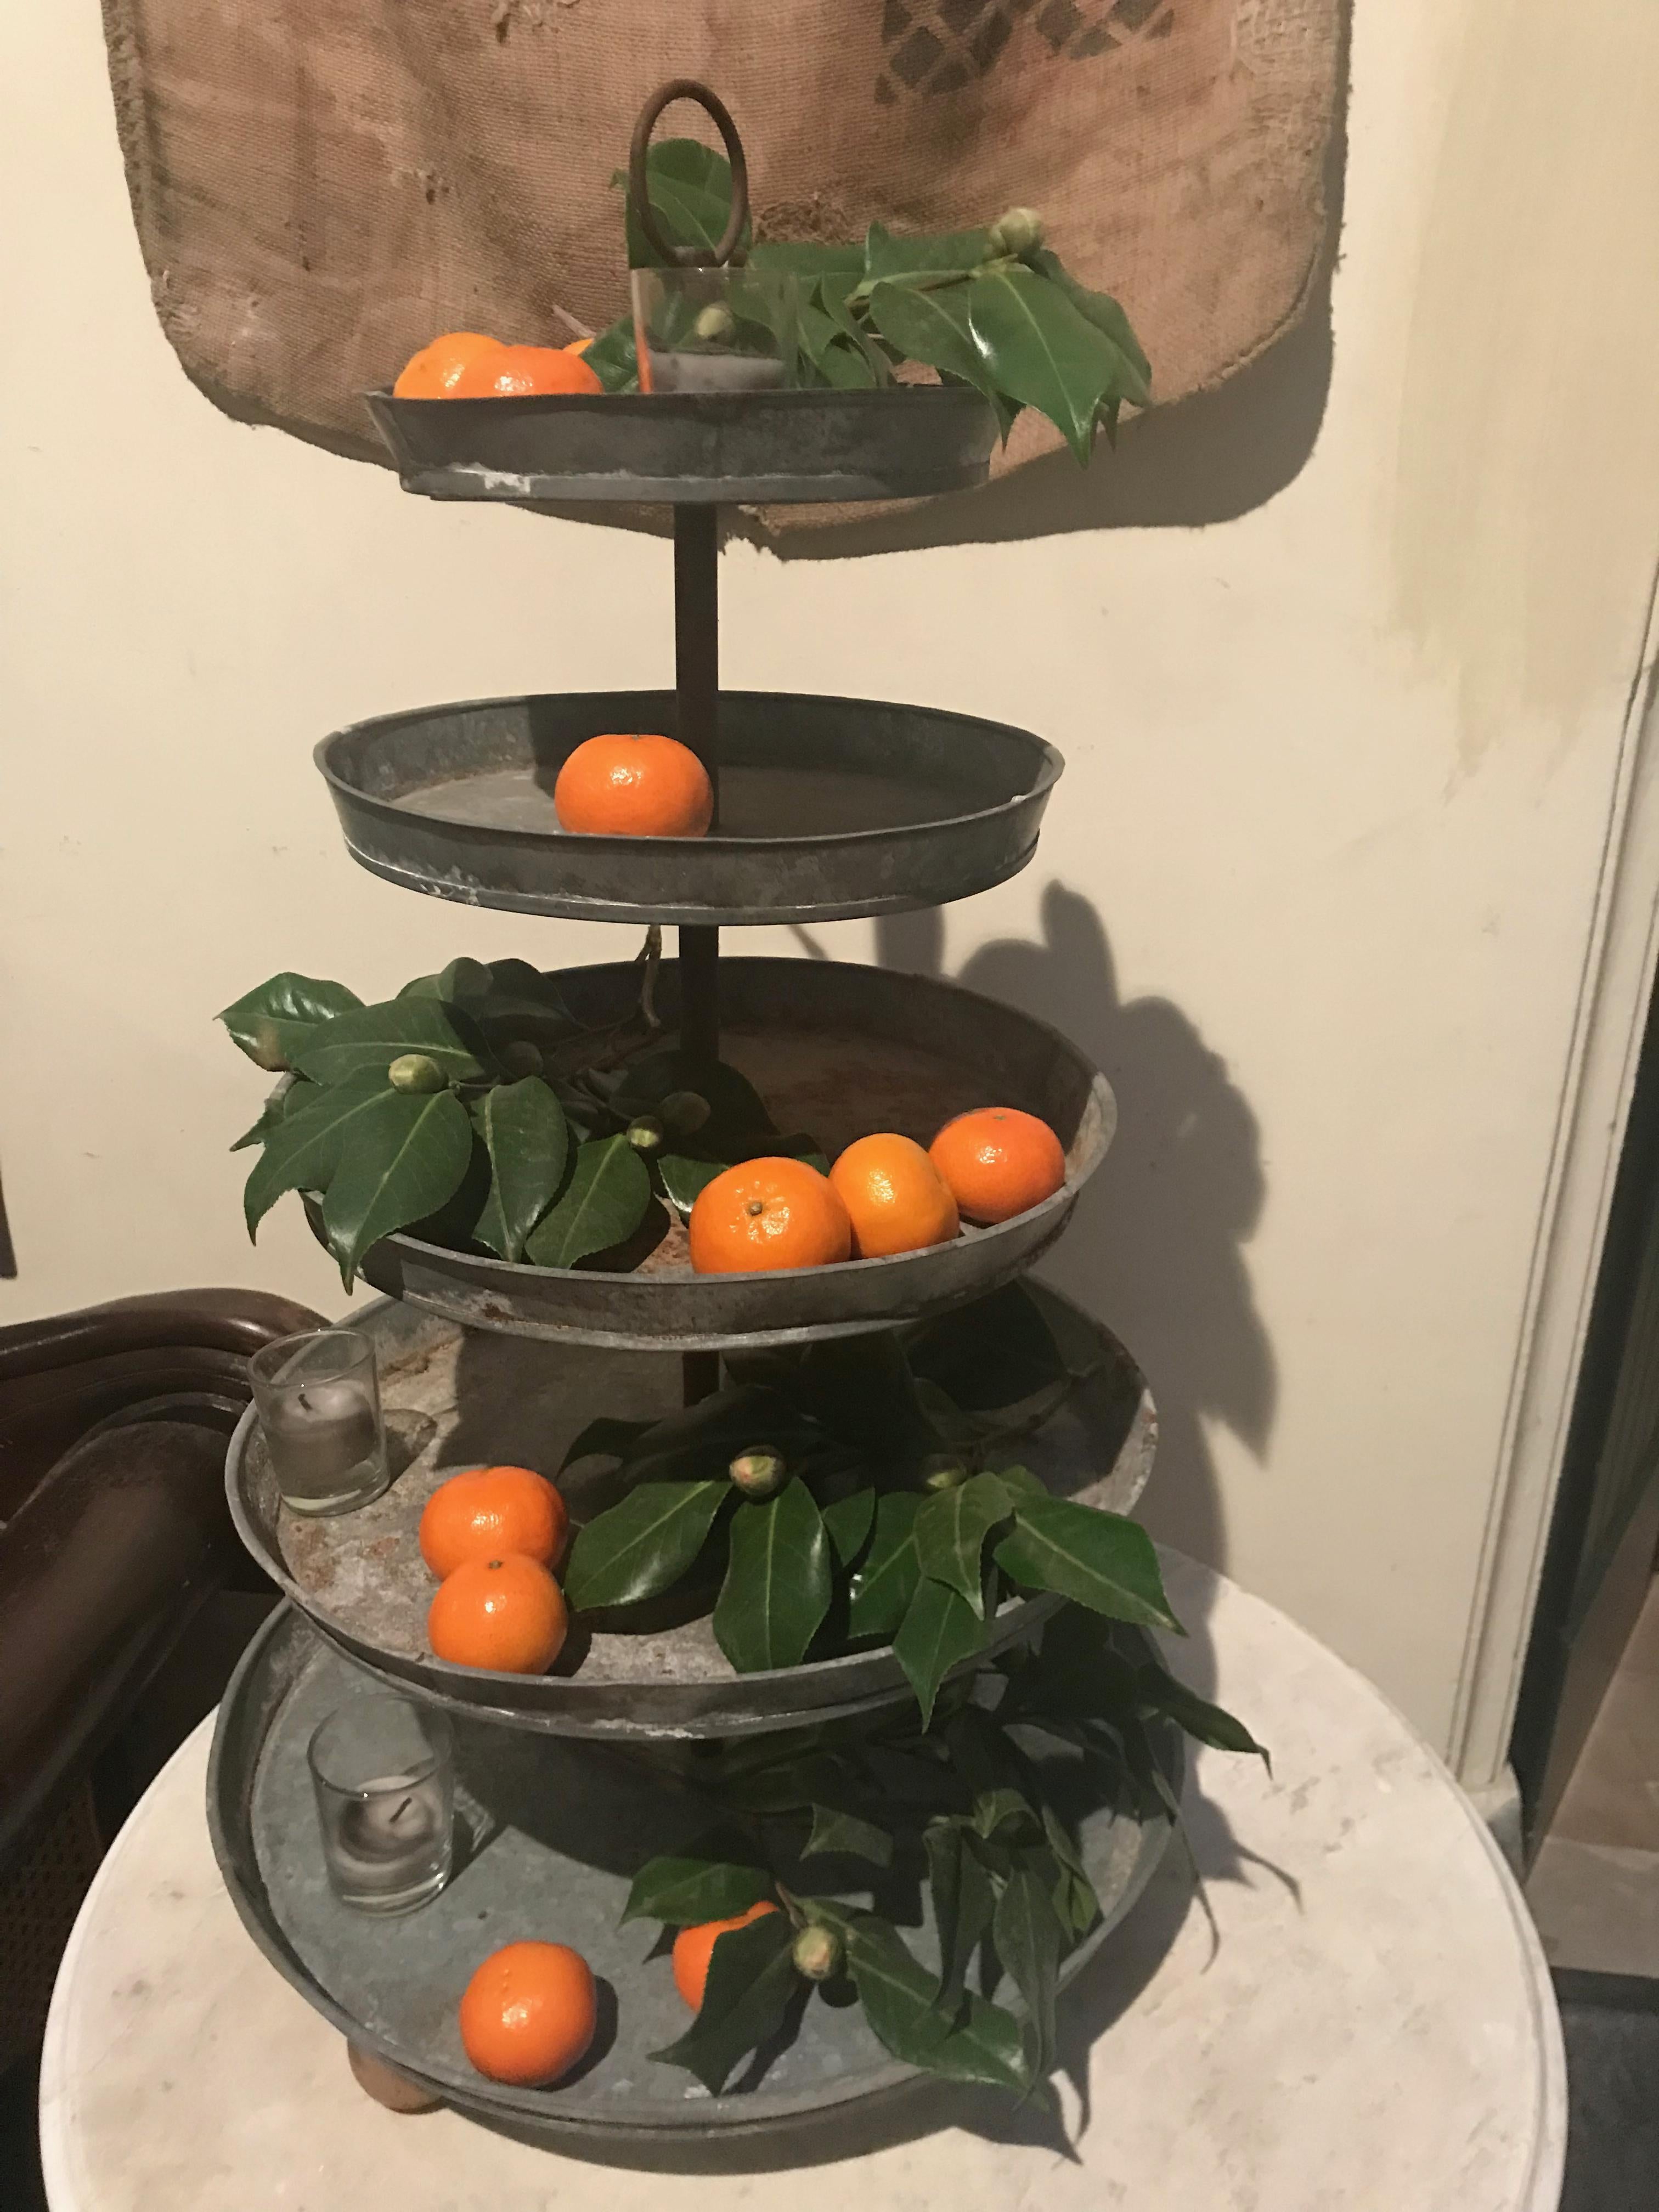 Very decorative French galvanized metal five-tier plant stand centrepiece with iron handle.
This stand was used in a flower shop but it could be filled with cupcakes, potted plants, soaps and oils for the bath, oils and herbs in the kitchen or tea